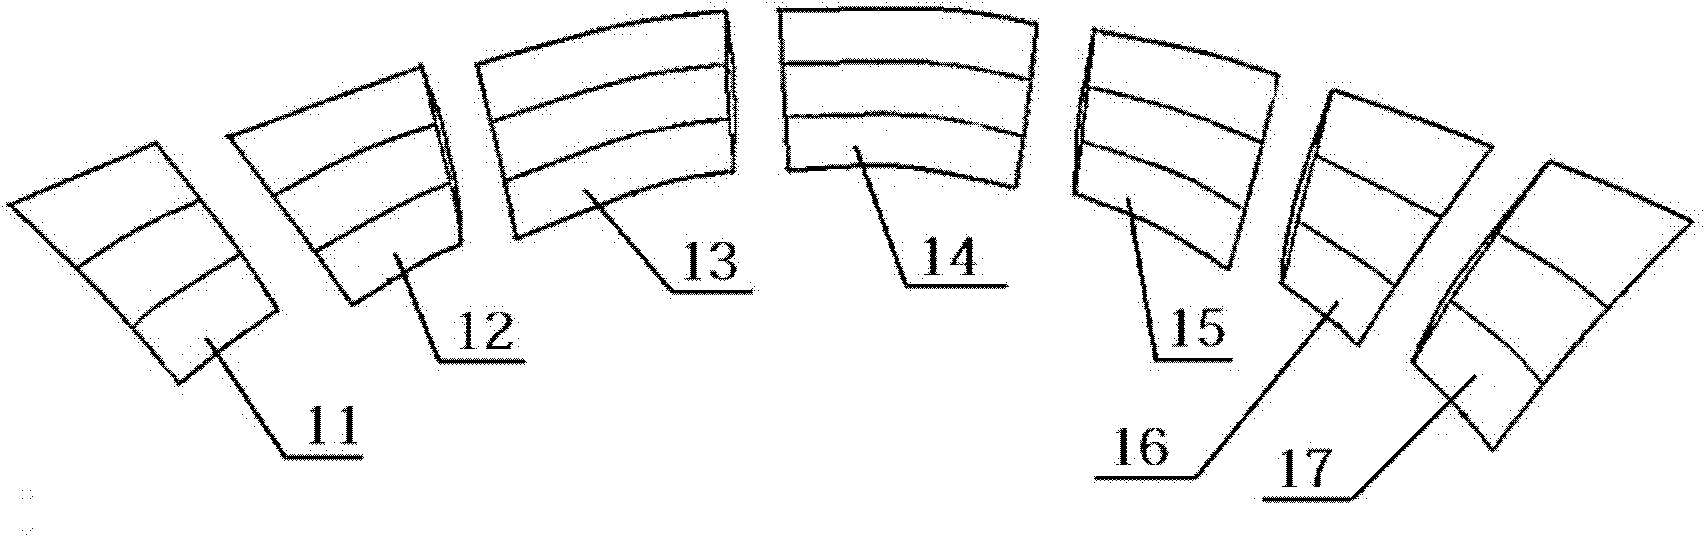 Three-crankcase steel connecting bridge and manufacturing method thereof